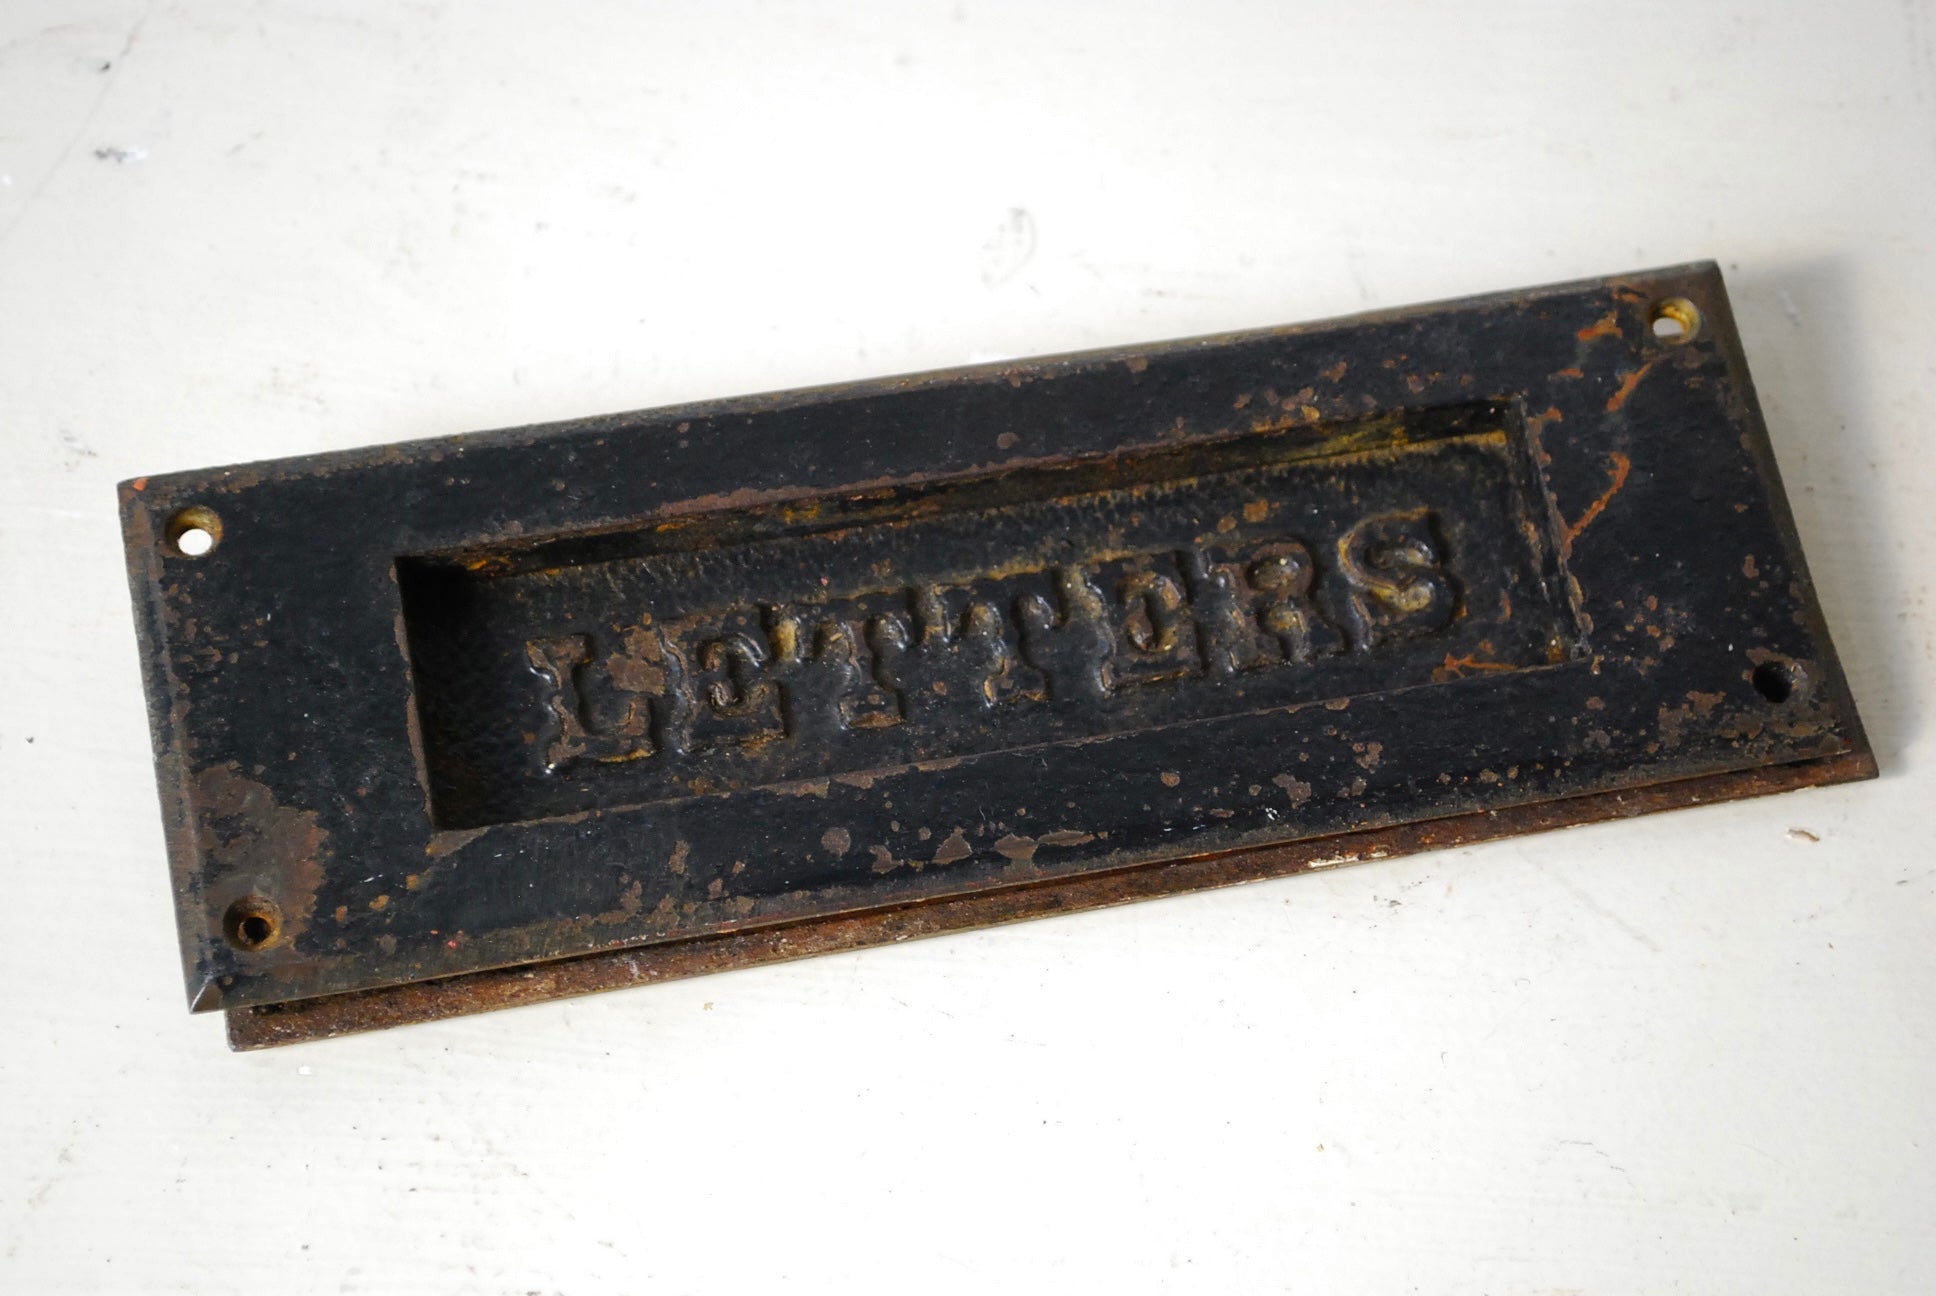 1910 Cast Metal / Brass Mail slot Box  for Letters | Scott Landon Antiques and Interiors.